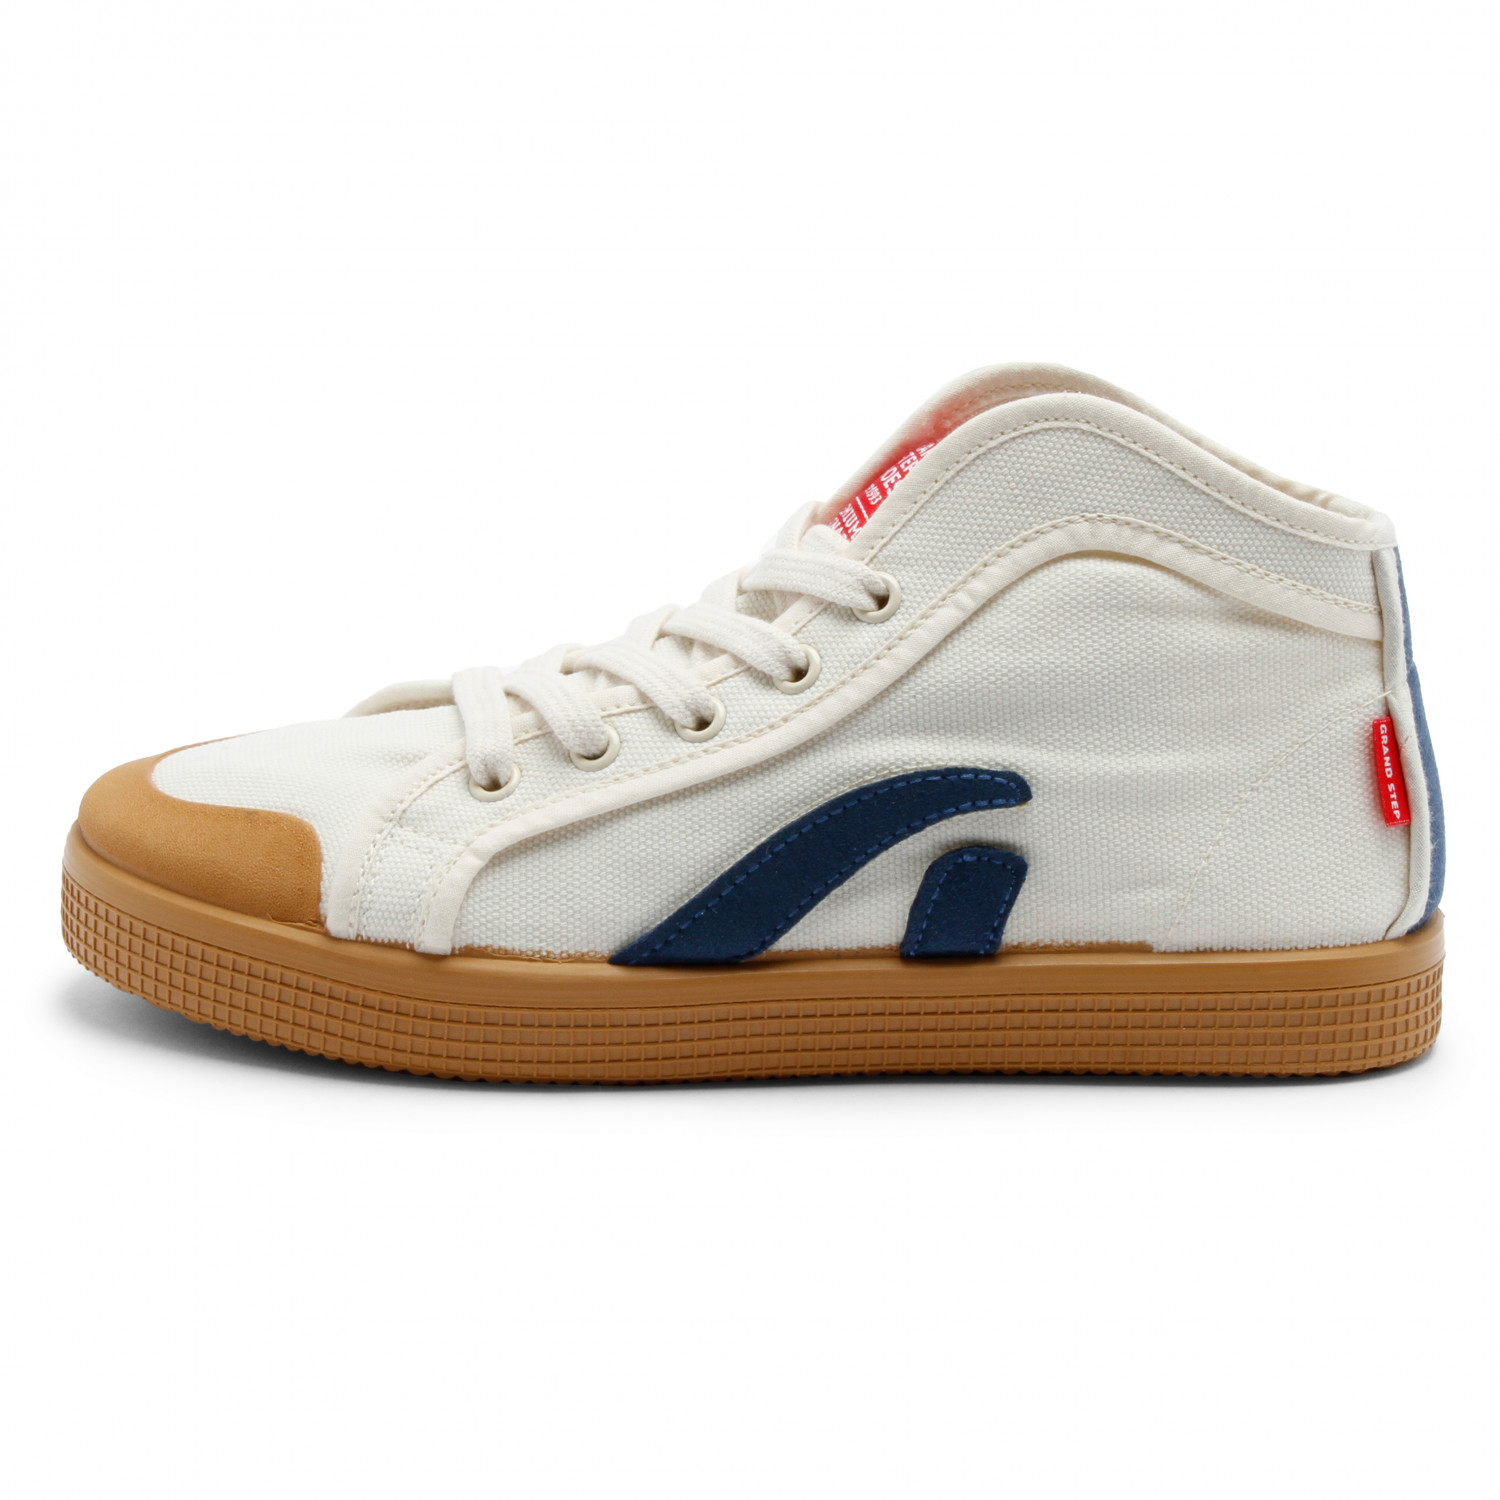 кроссовки mtng golden offwhite Кроссовки Grand Step Shoes Taylor, цвет Offwhite/Navy